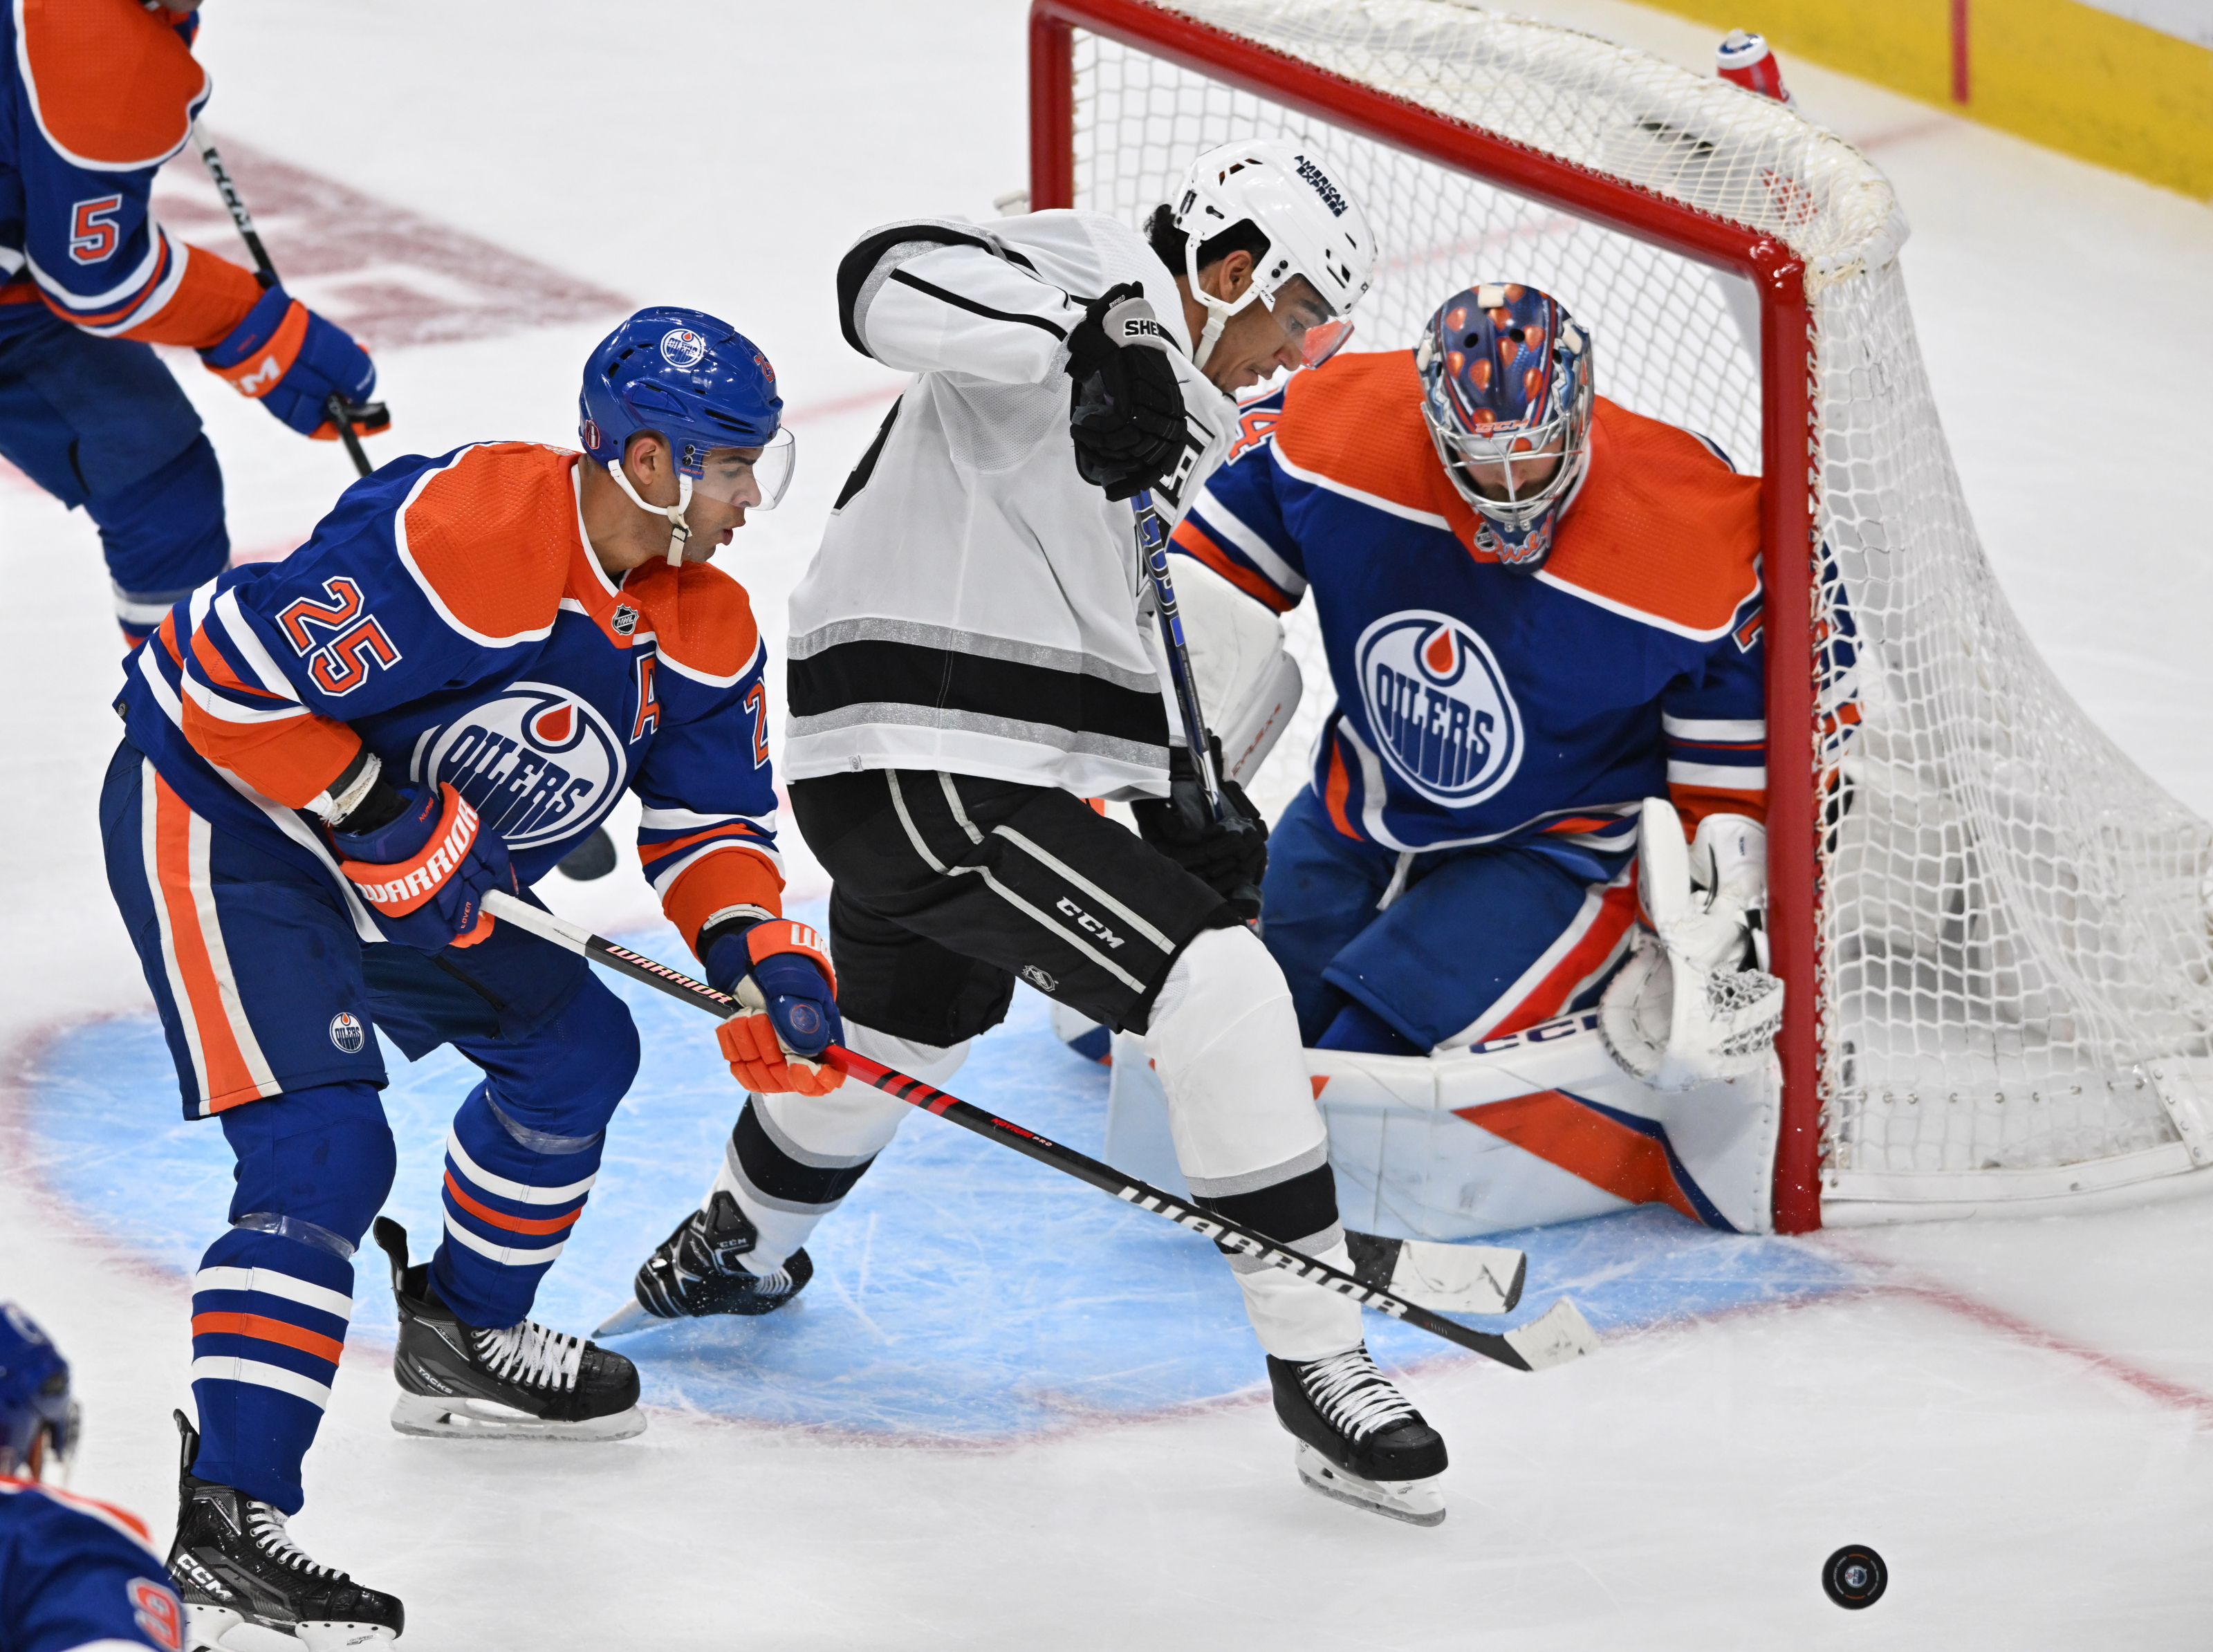 NHL Playoffs Offer: Win $200 if Kings or Oilers Score a Goal